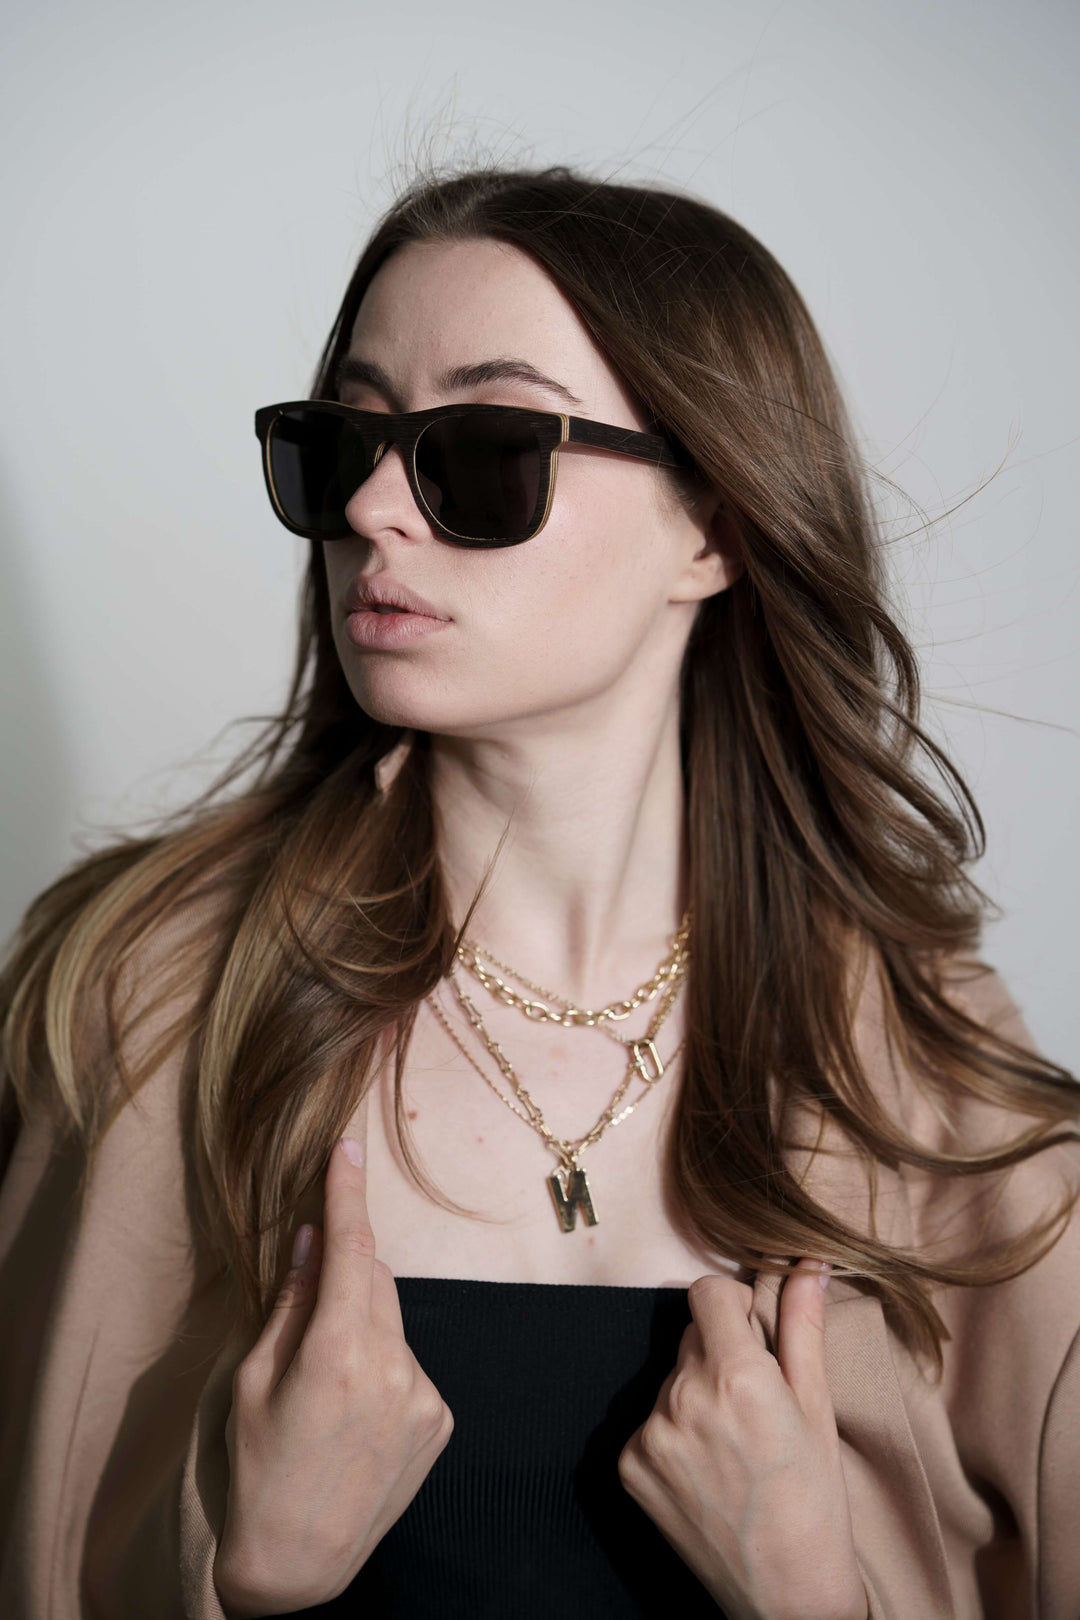 Image of a woman in wooden sunglasses and a necklace.